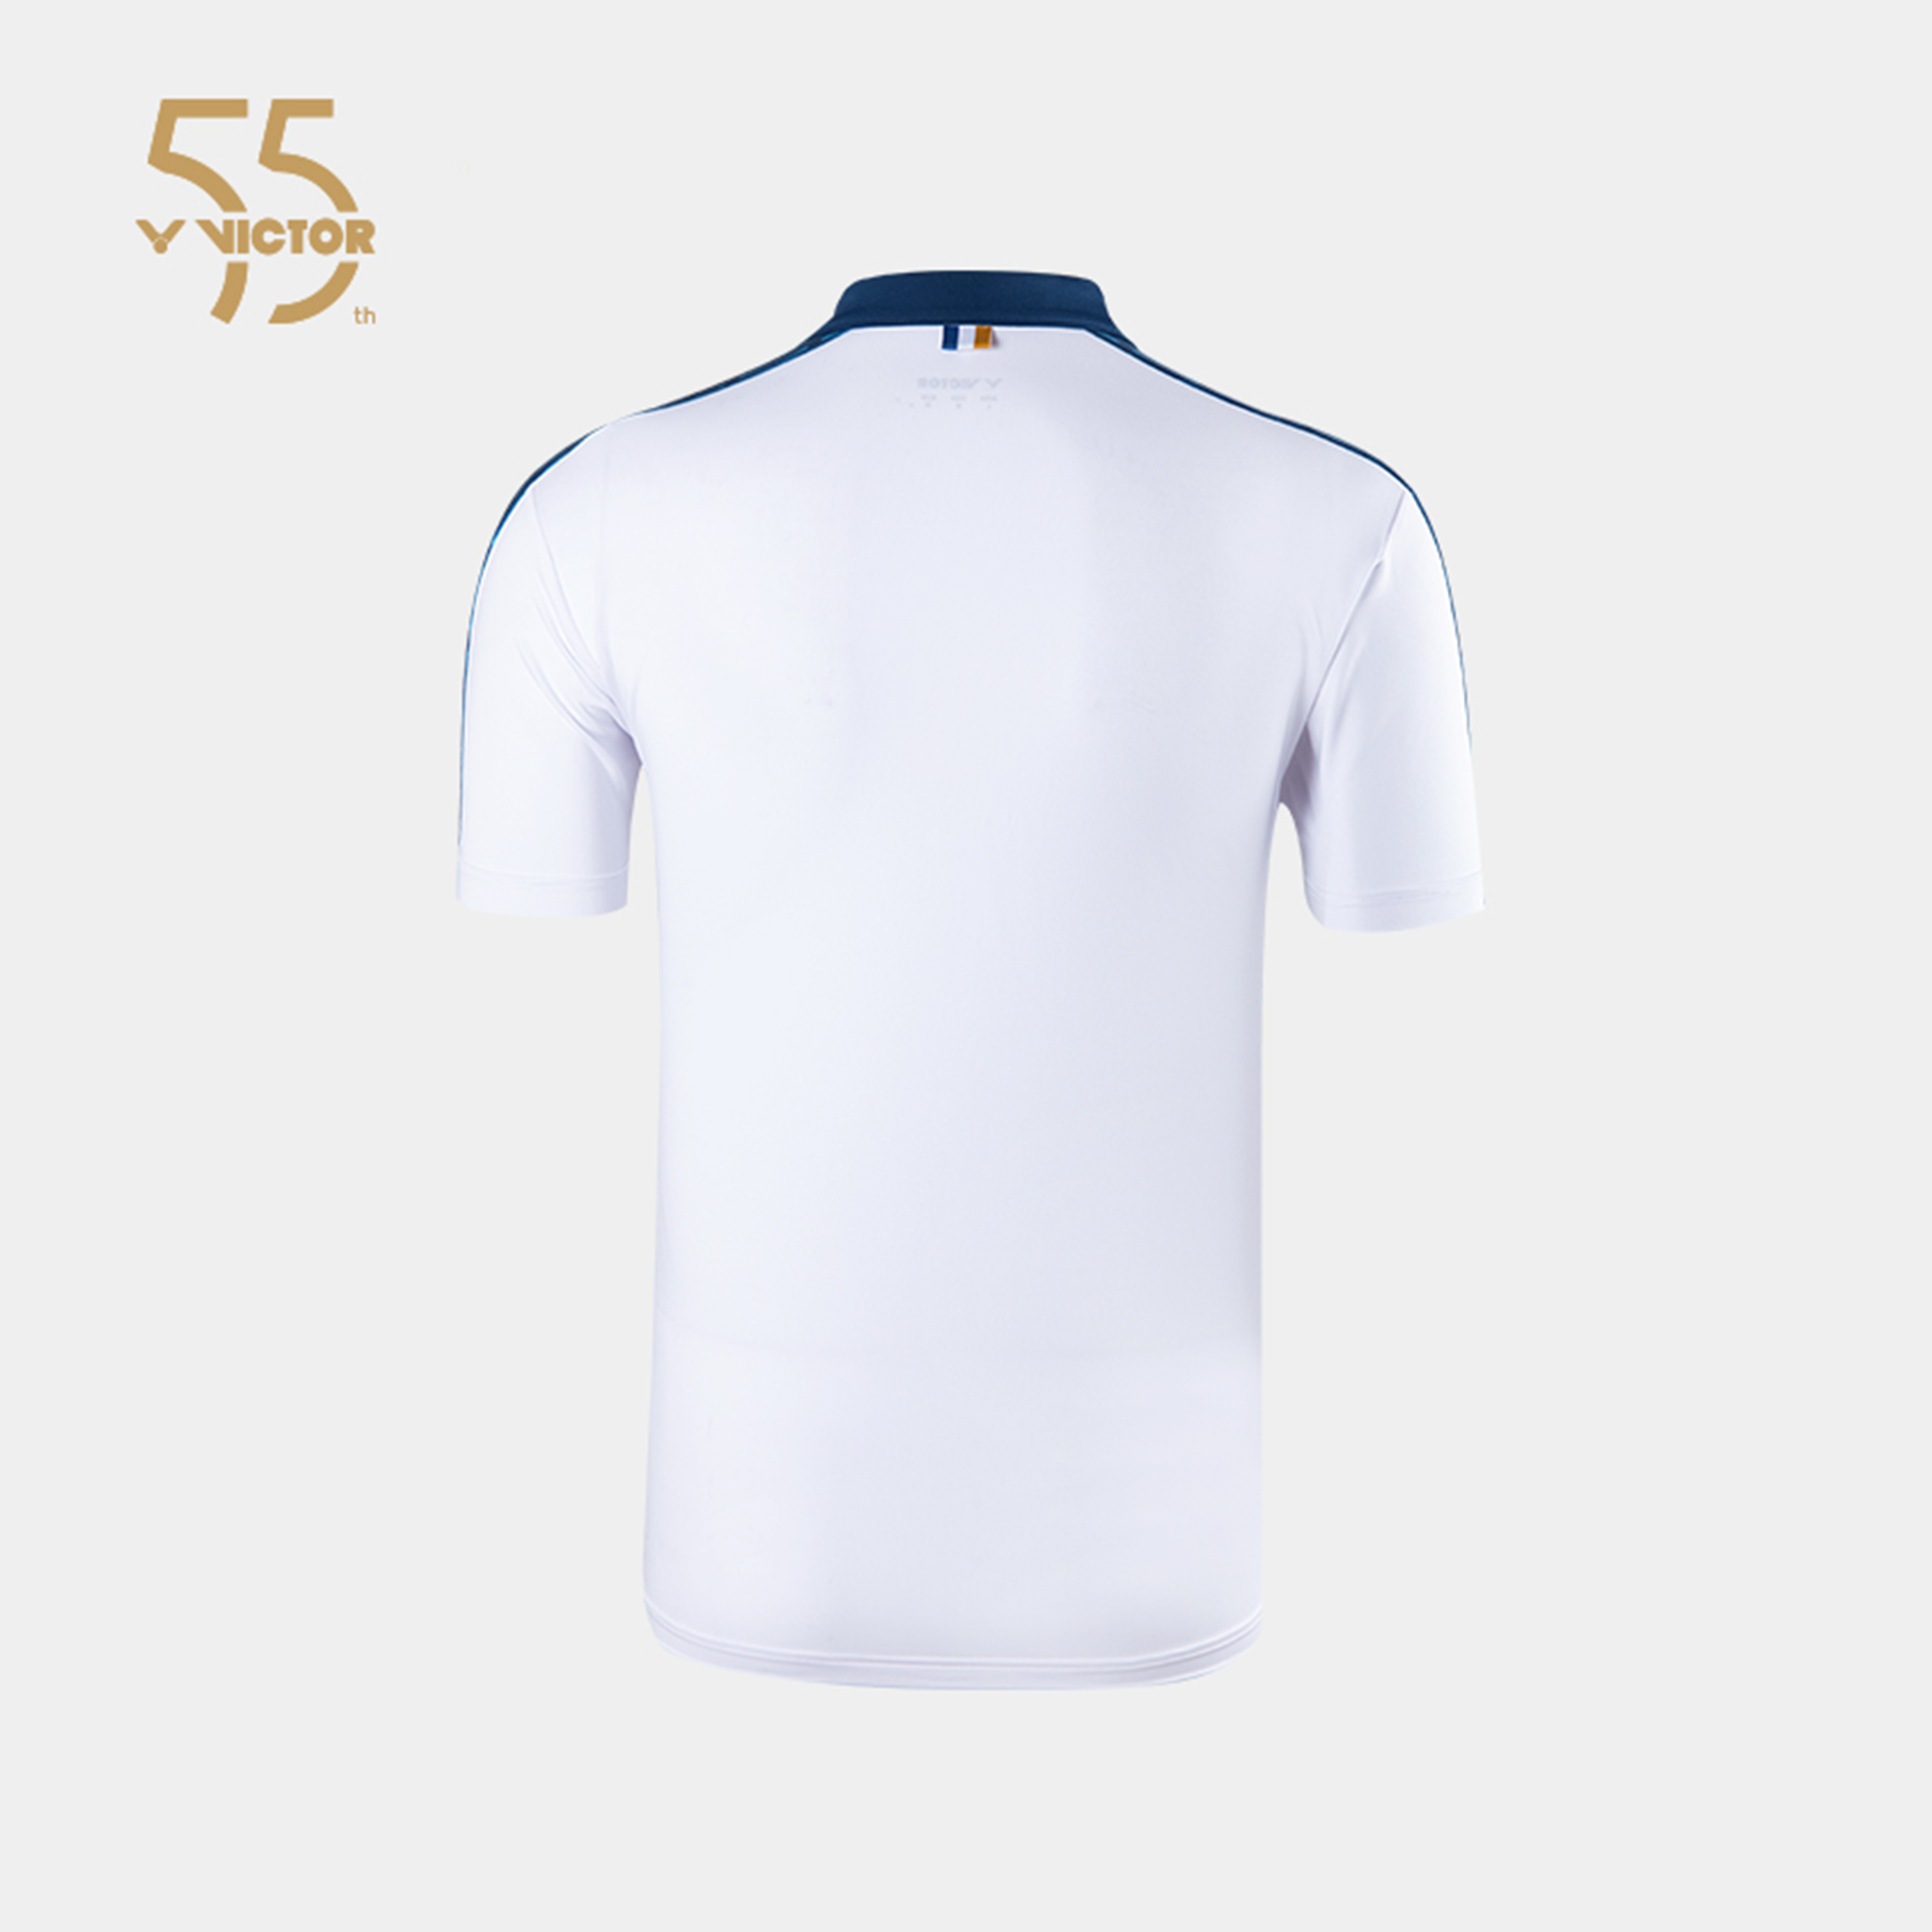 Victor 55th Anniversary Edition S-5502A Premium Sports Polo Shirt White UNISEX (Clearance)